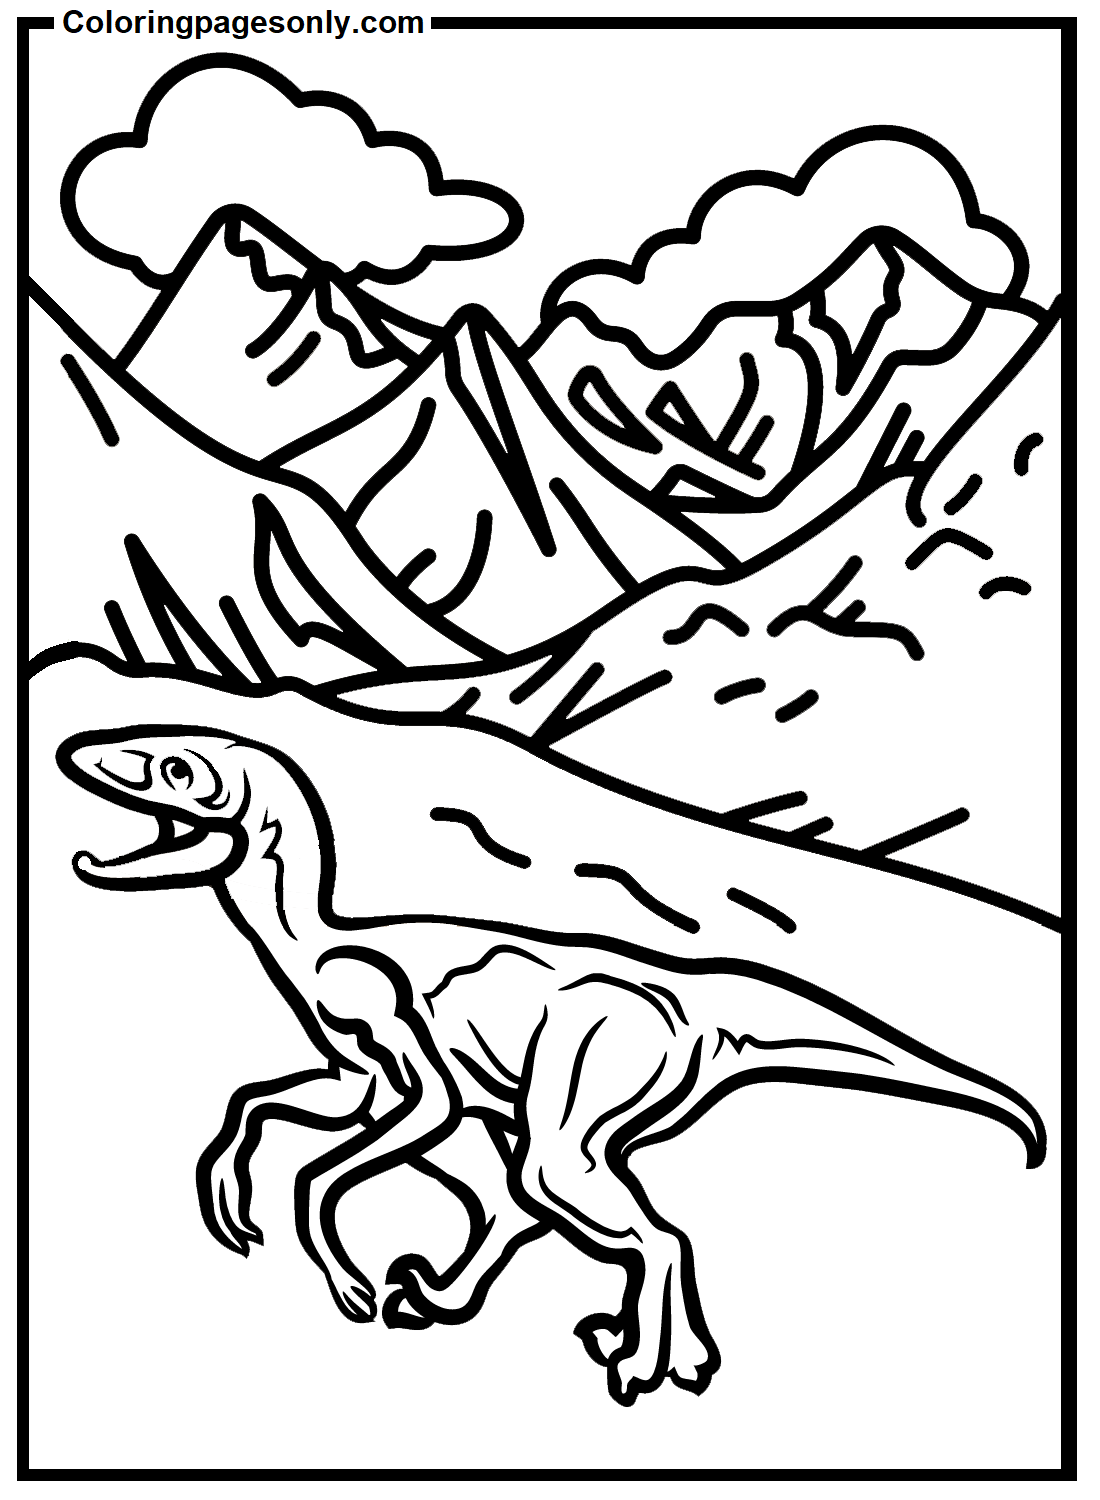 Velociraptor Picture Coloring Pages